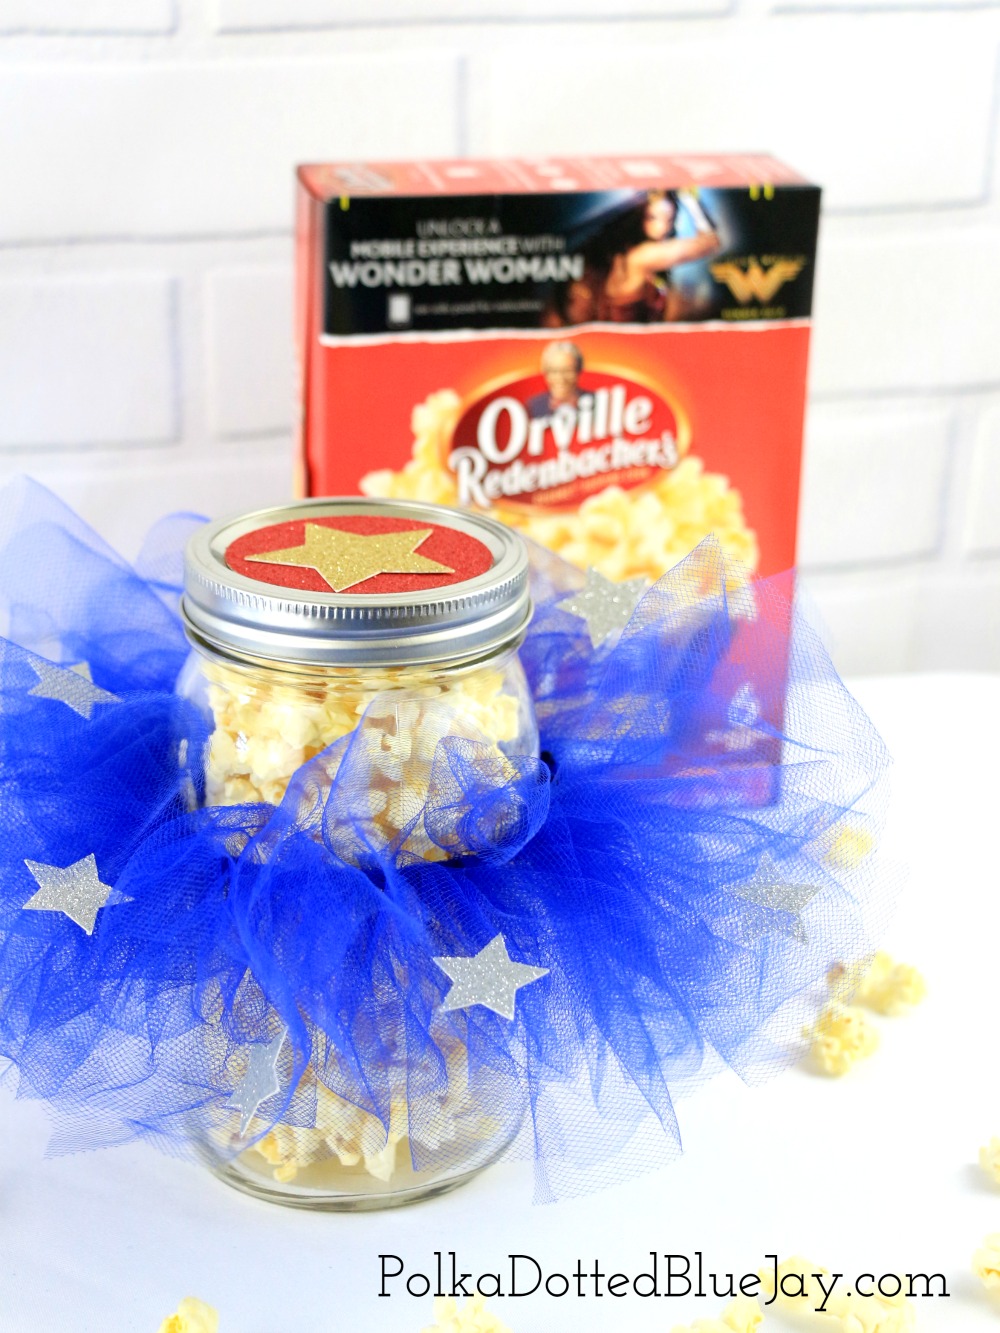 Get ready to celebrate the new Wonder Woman movie with DIY Jar Tutus perfect for a movie night!